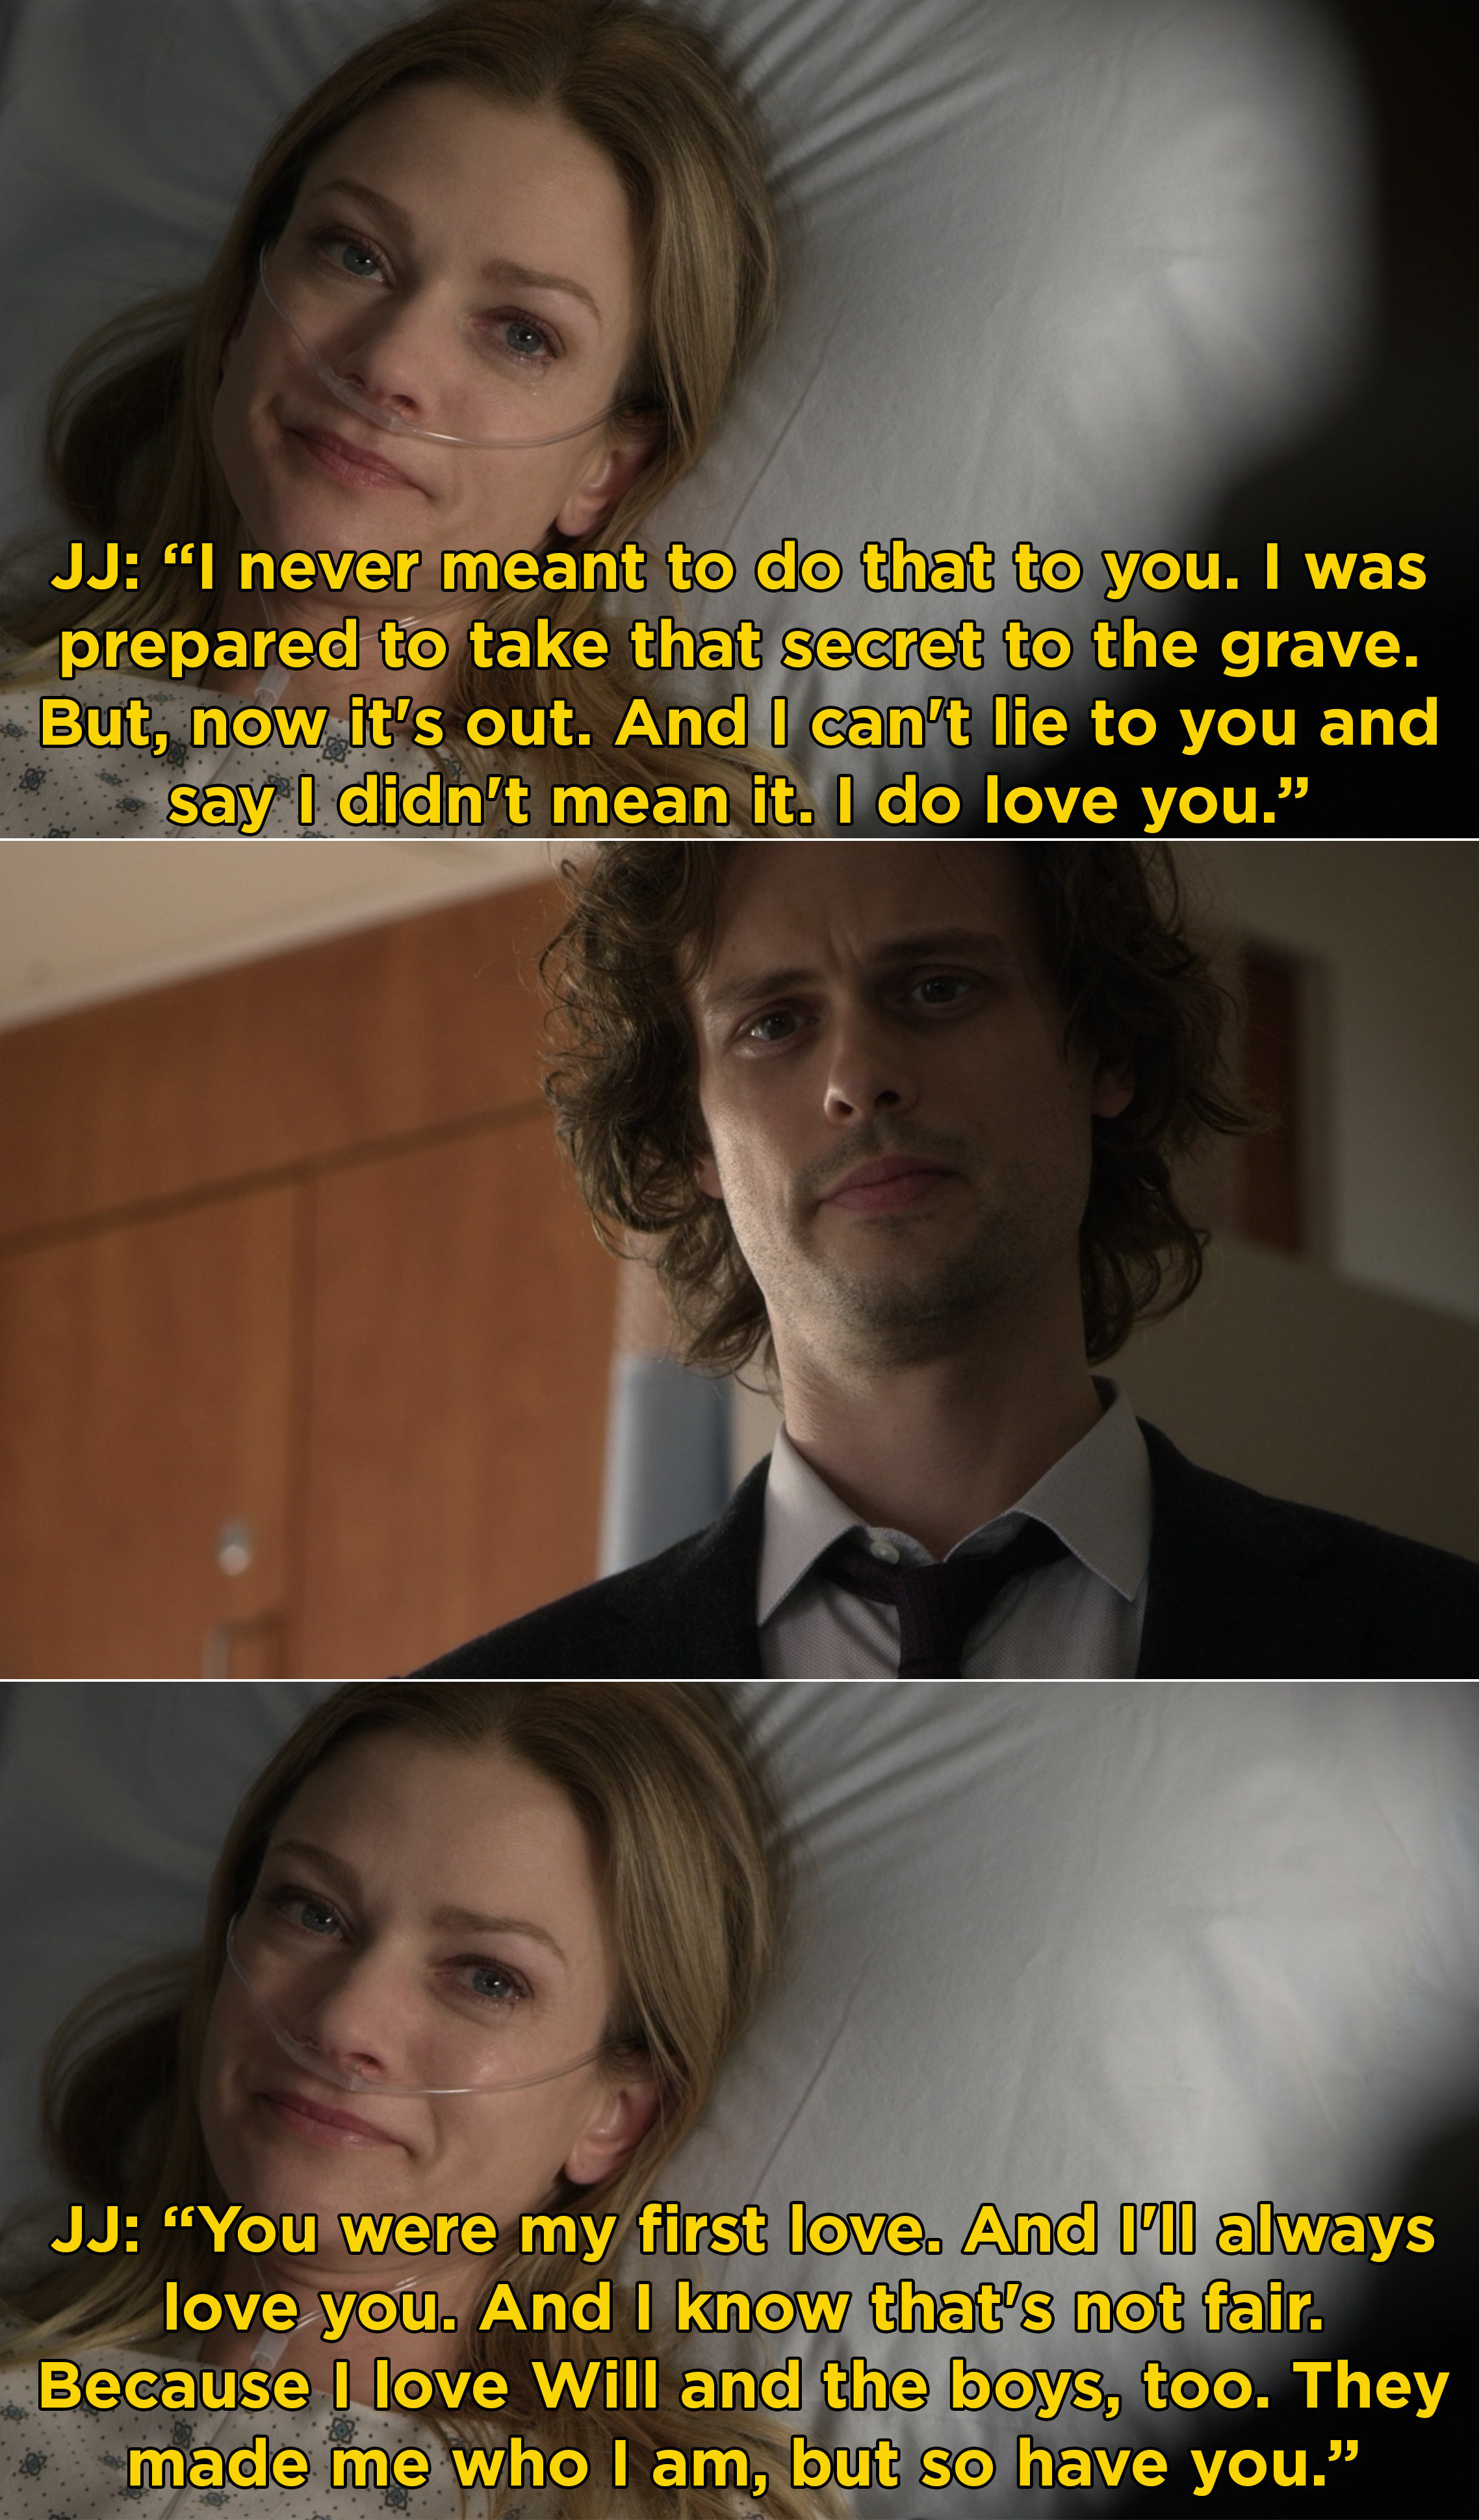 JJ confesses she loves Spencers and says she meant to take that to the grave, tells Spencer he was her first love